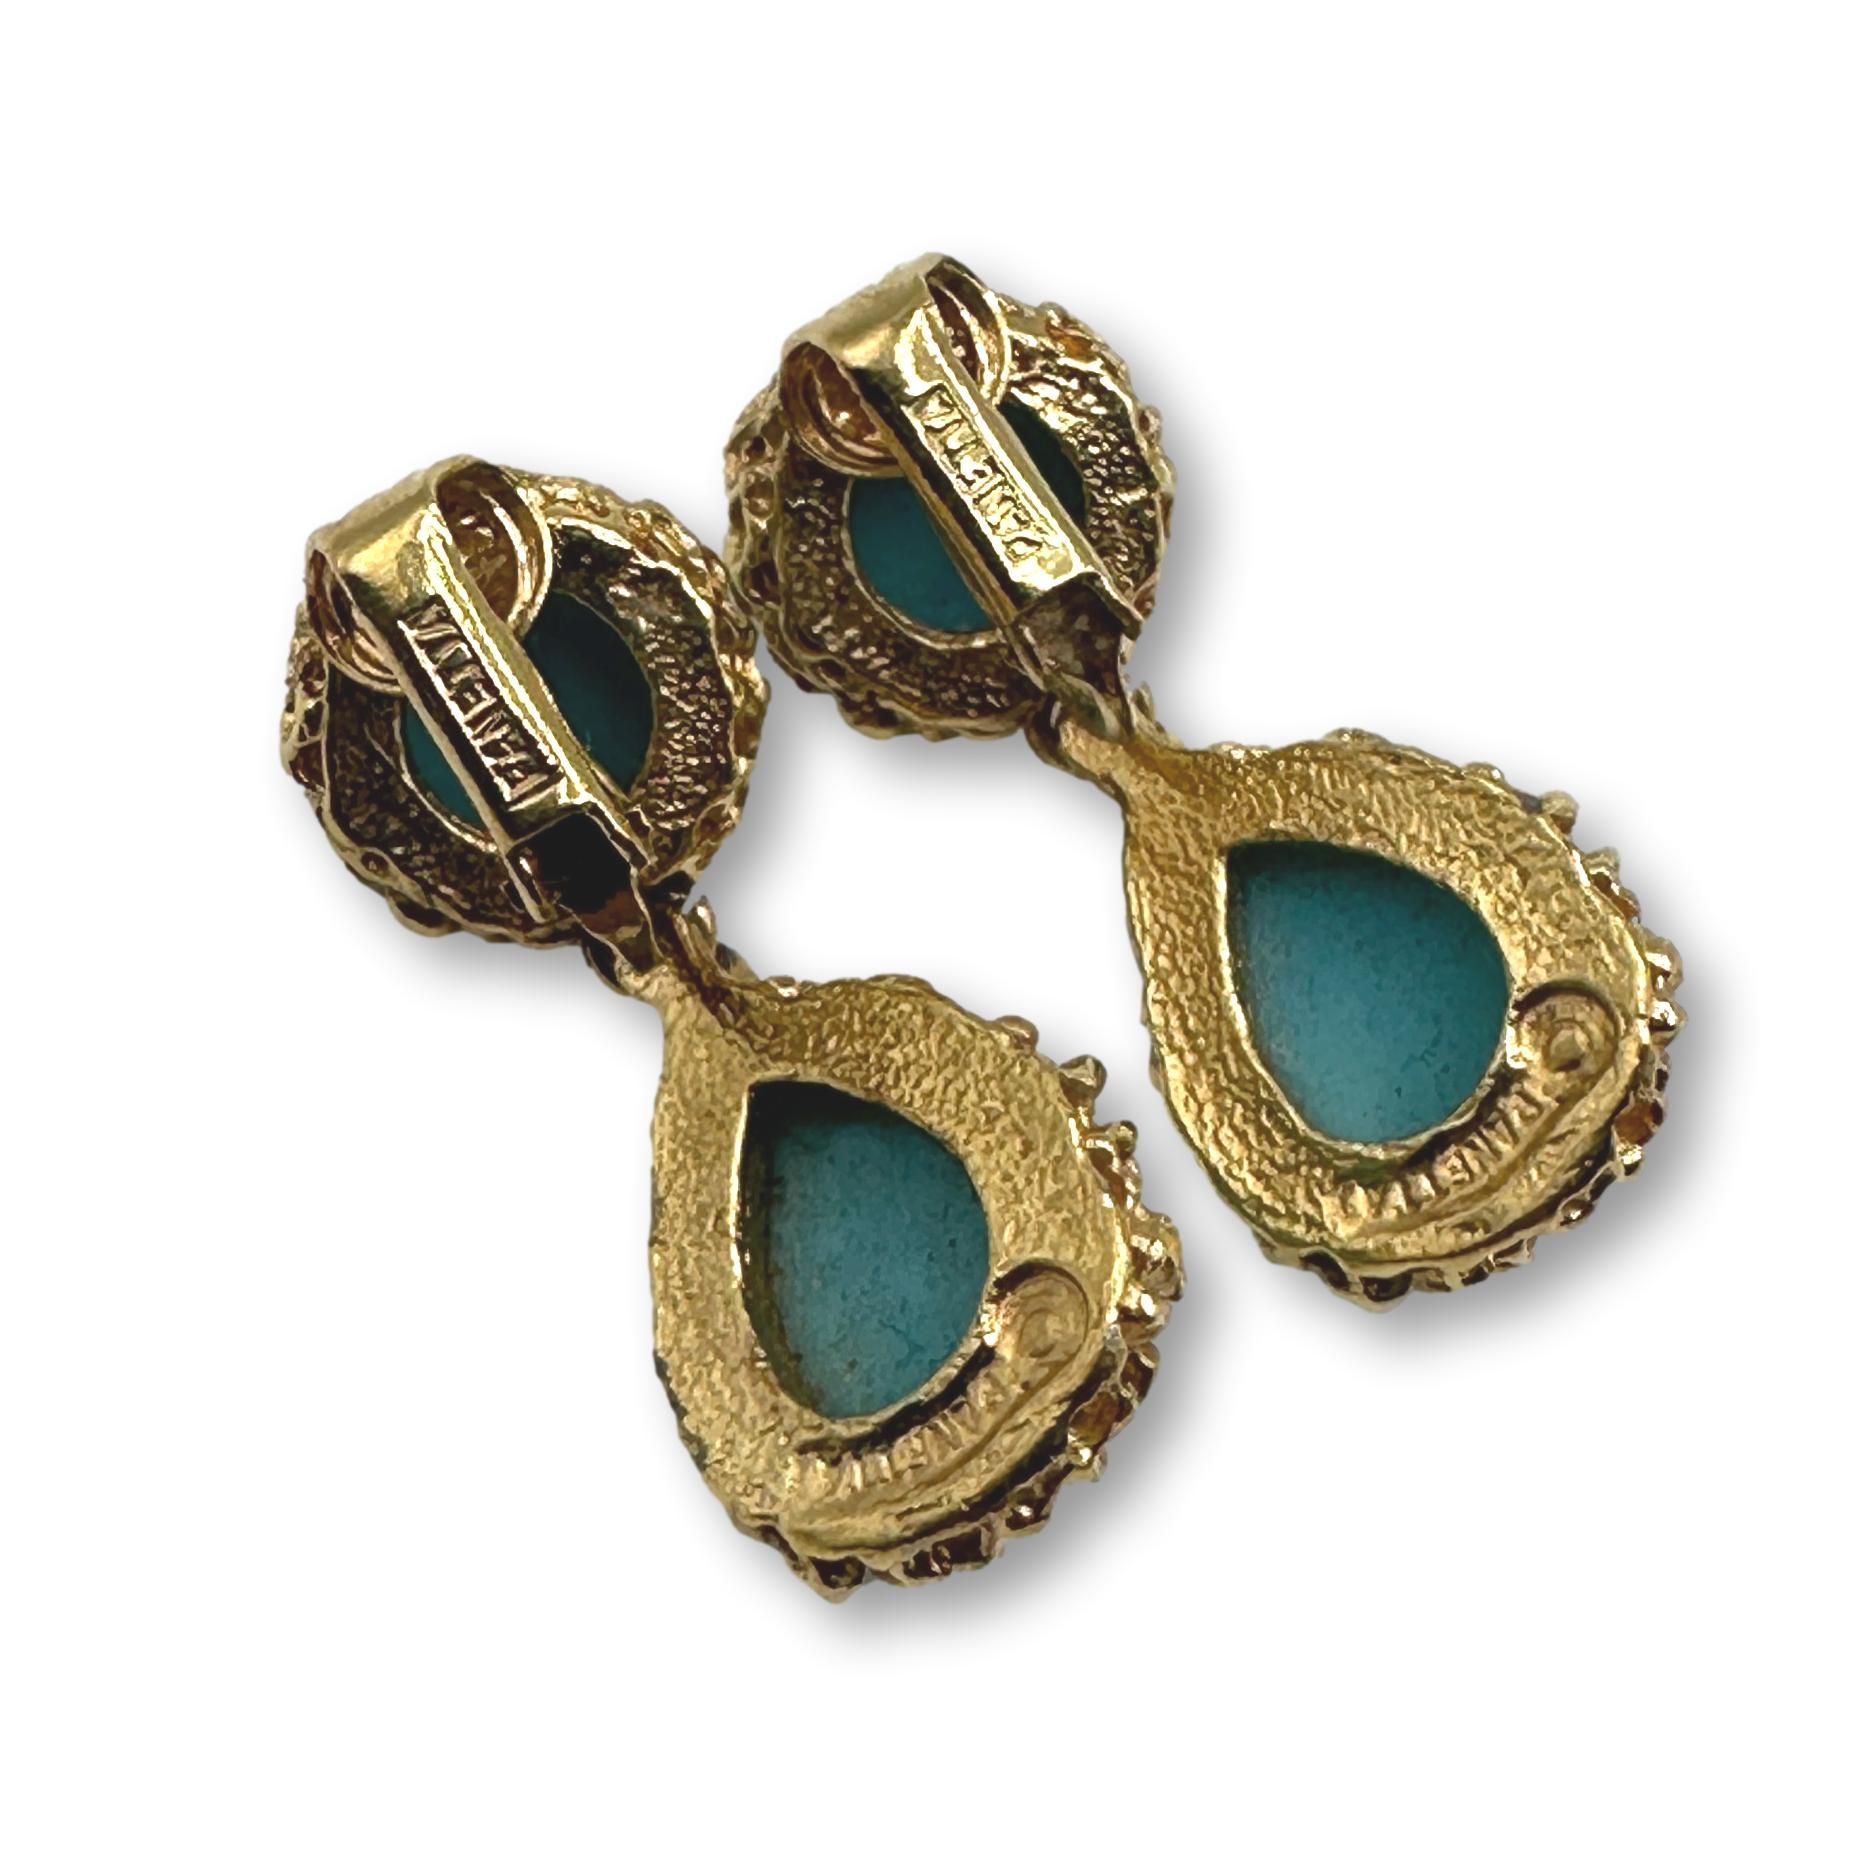 Vintage Panetta Brutalist Faux Turquoise Clip-on Earrings